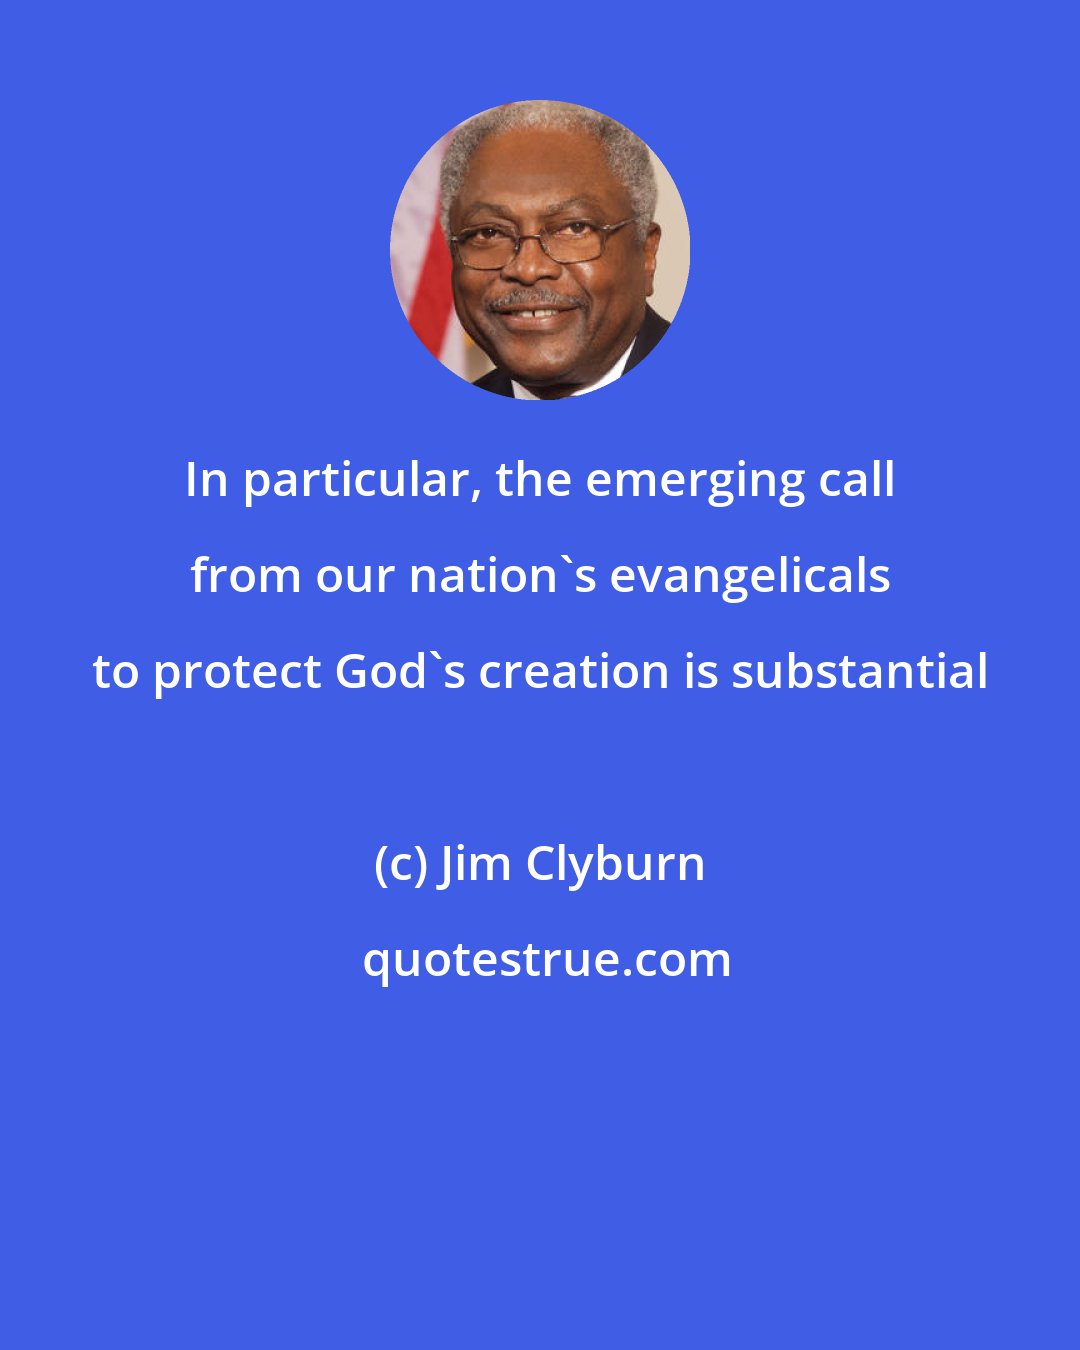 Jim Clyburn: In particular, the emerging call from our nation's evangelicals to protect God's creation is substantial